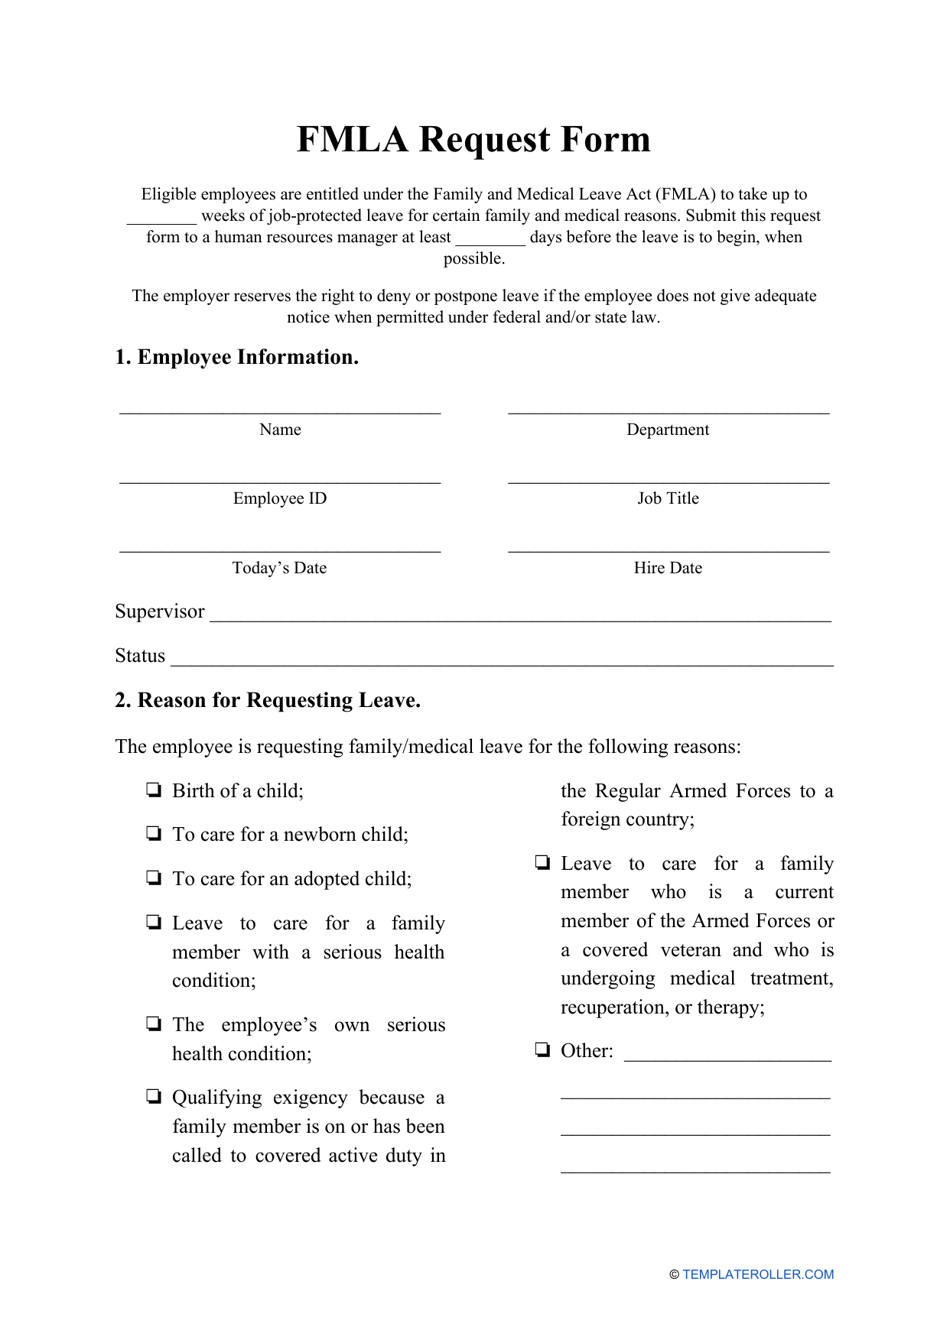 fmla-request-form-fill-out-sign-online-and-download-pdf-templateroller